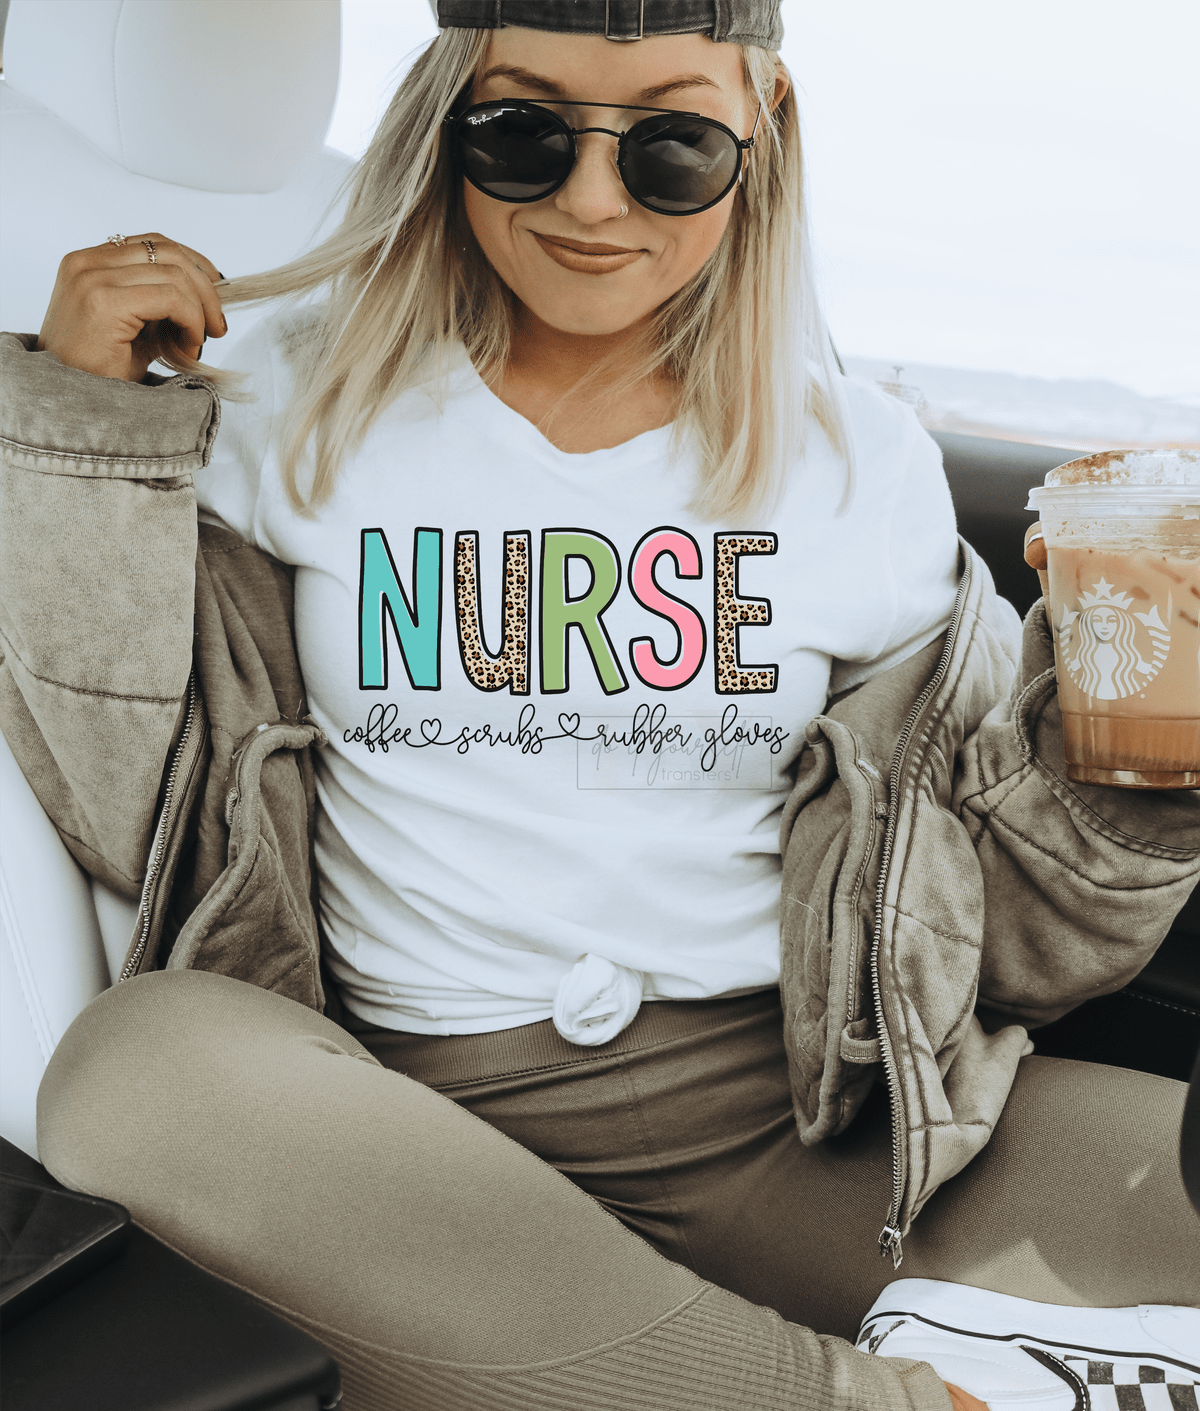 NURSE Coffee Scrubs Rubber Gloves size ADULT DTF TRANSFERPRINT TO ORDER - Do it yourself Transfers